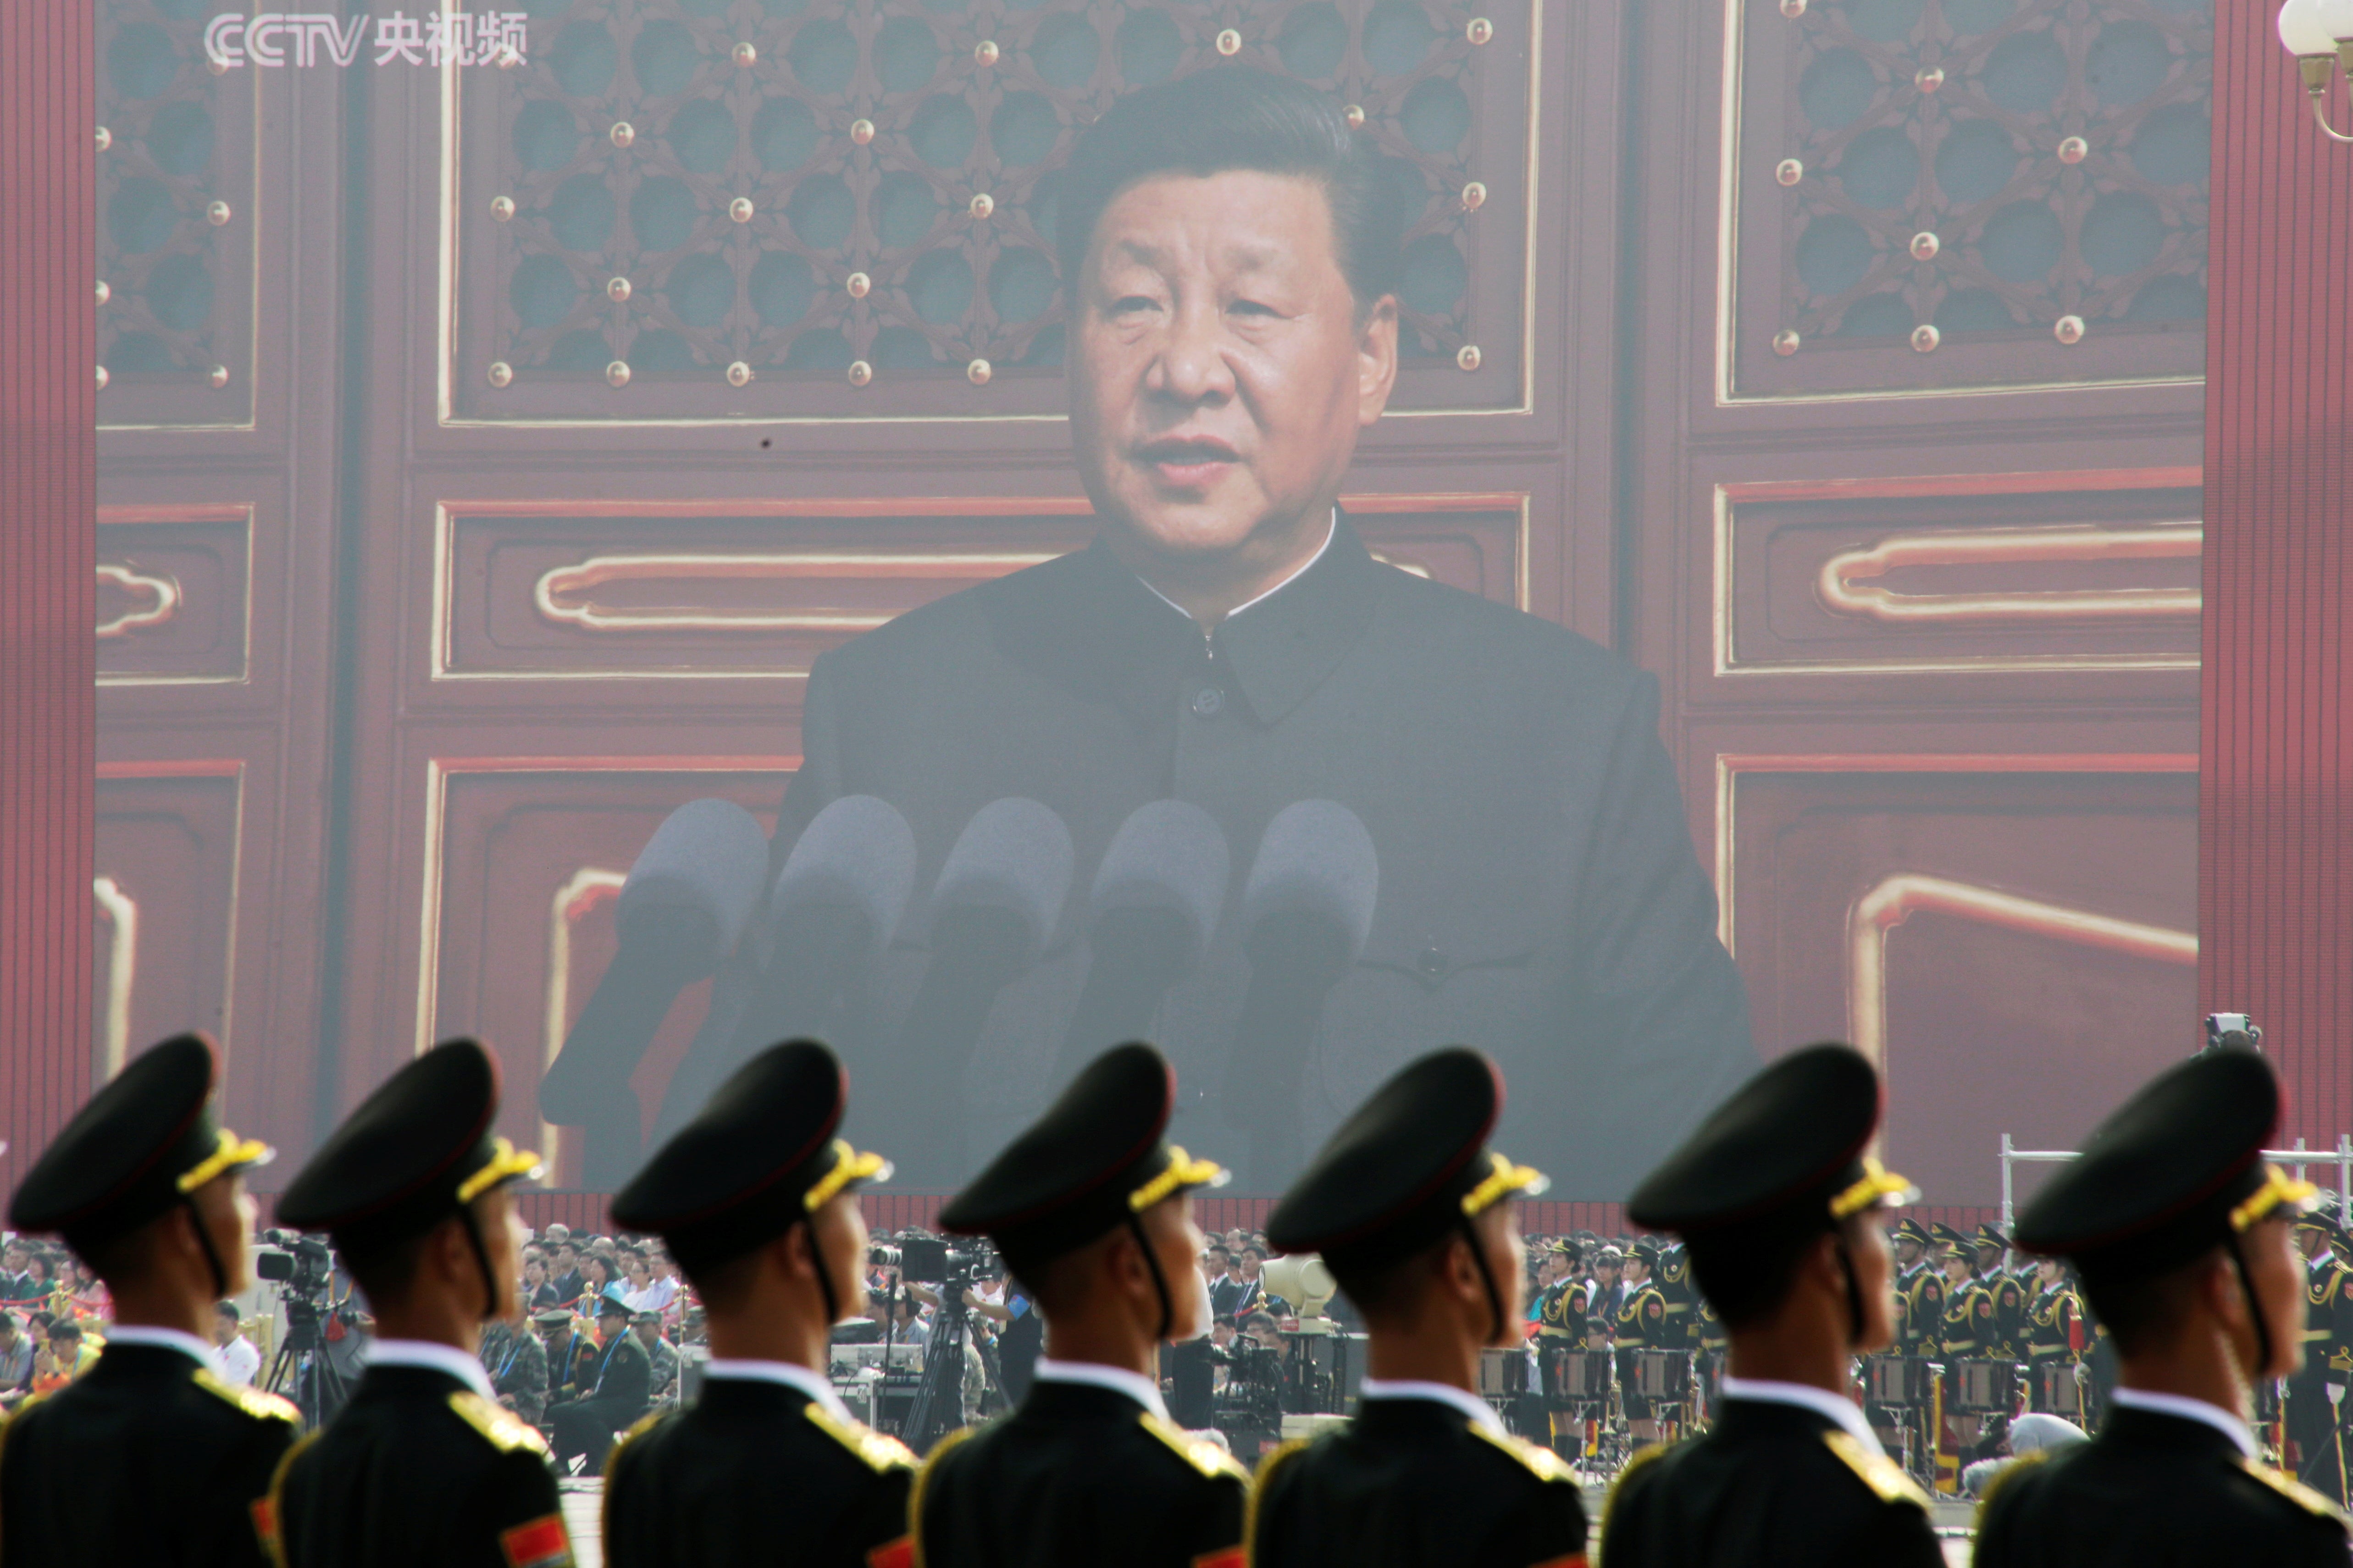 File photo: Soldiers of People's Liberation Army (PLA) are seen before a giant screen as Chinese President Xi Jinping speaks at a military parade in 2019